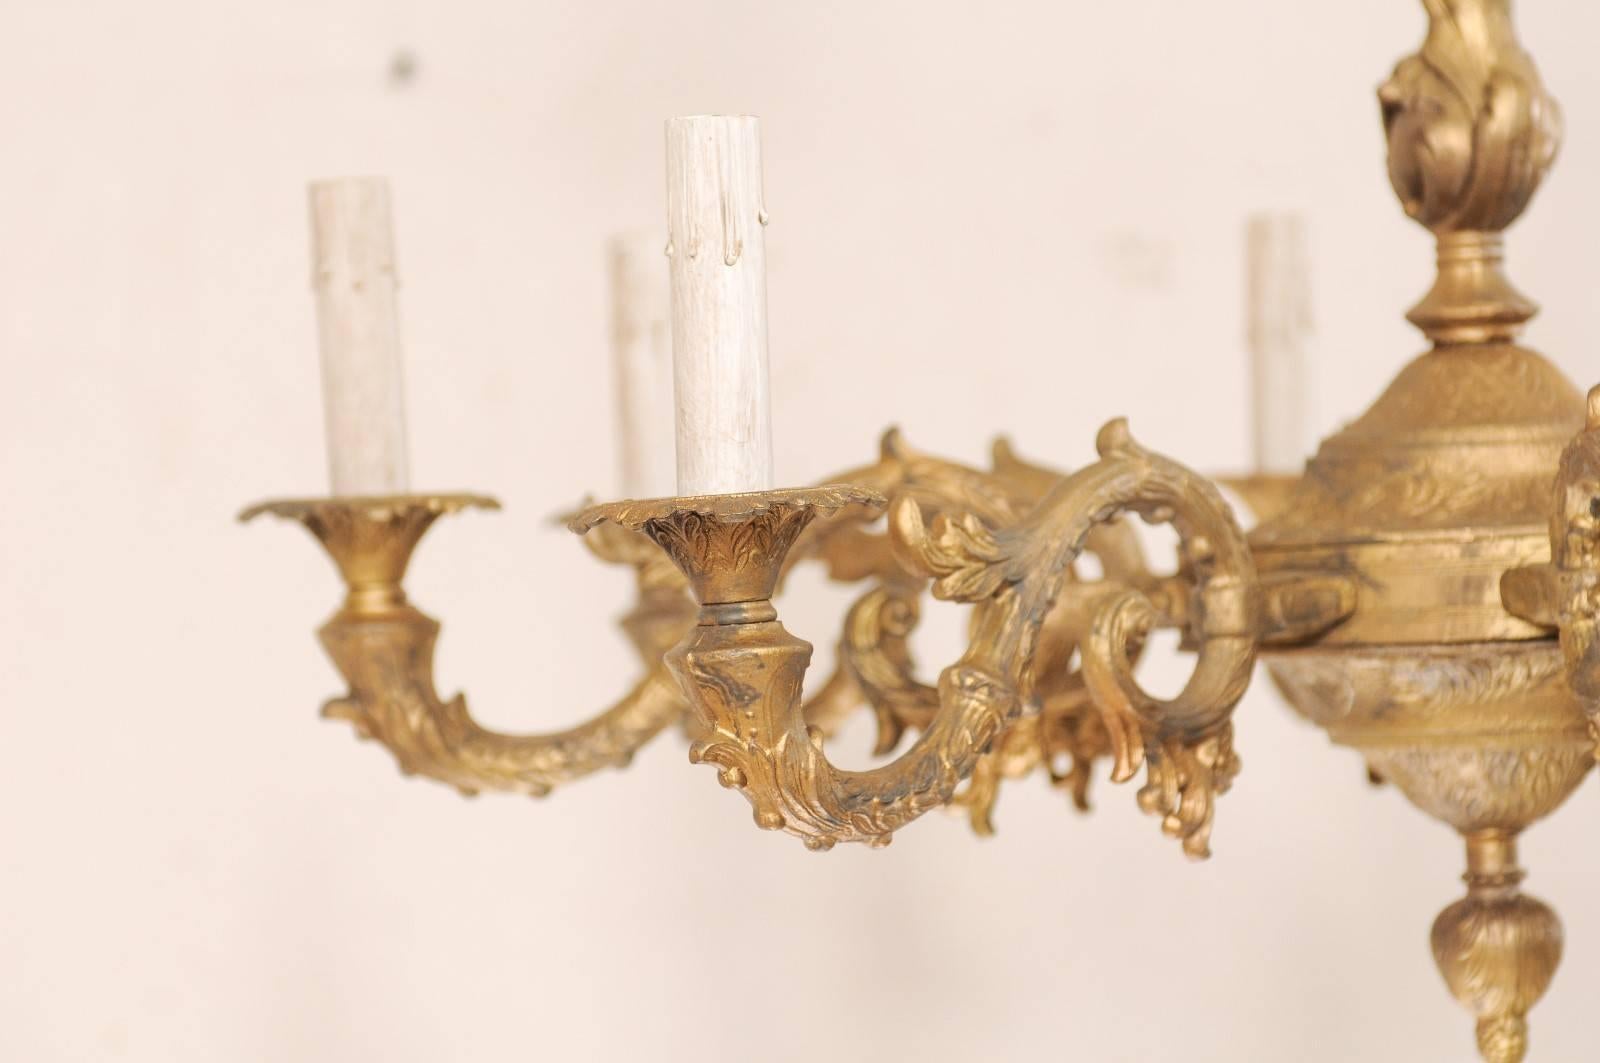 20th Century French Eight-Light Painted Metal Chandelier Ornate with Acanthus Leaf Motifs